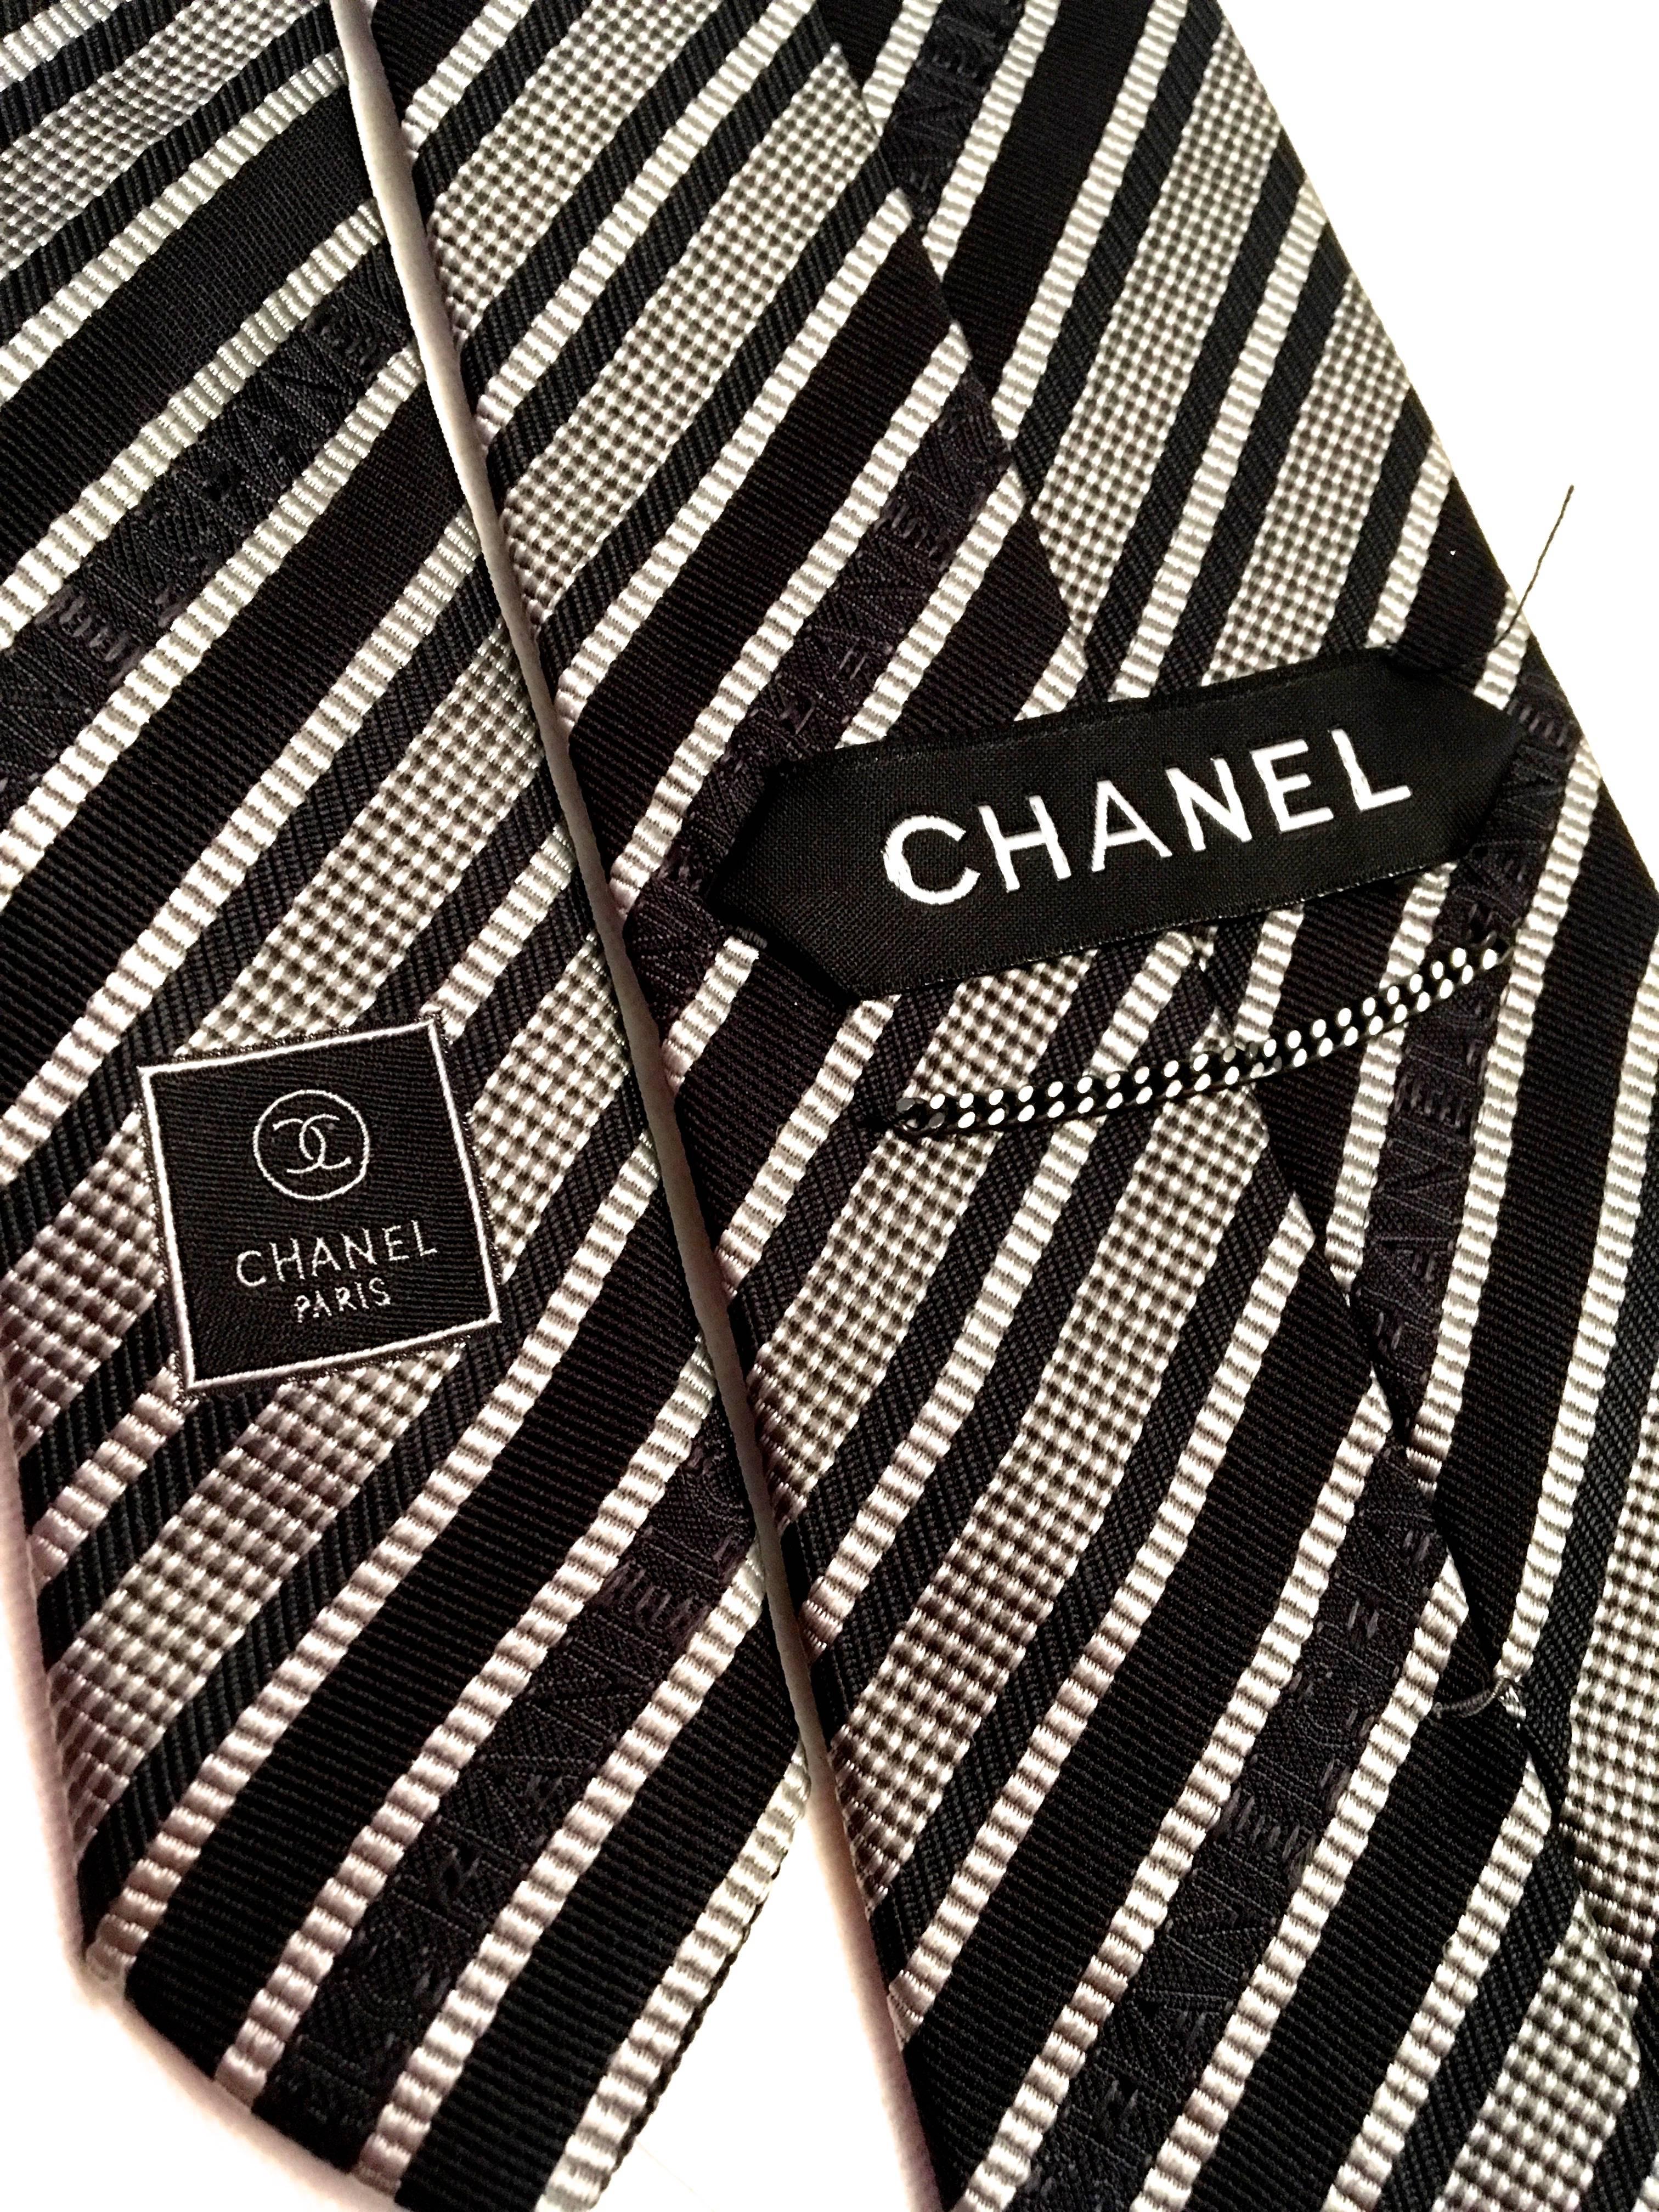 Chanel Silk Tie - Couture Collection  4